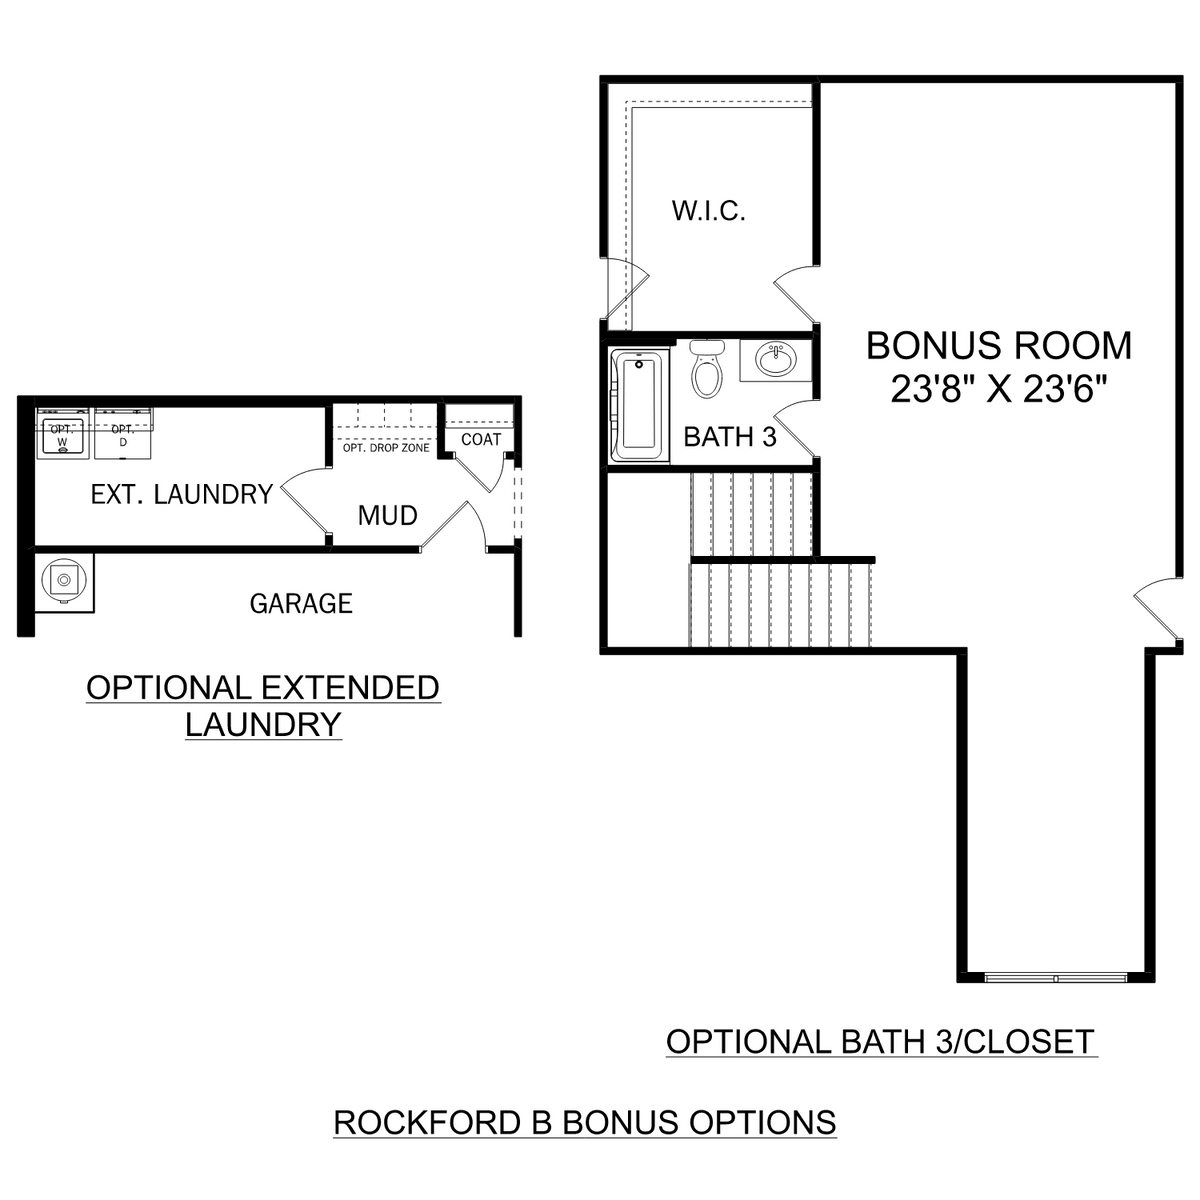 3 - The Rockford B with Bonus buildable floor plan layout in Davidson Homes' Creekside community.